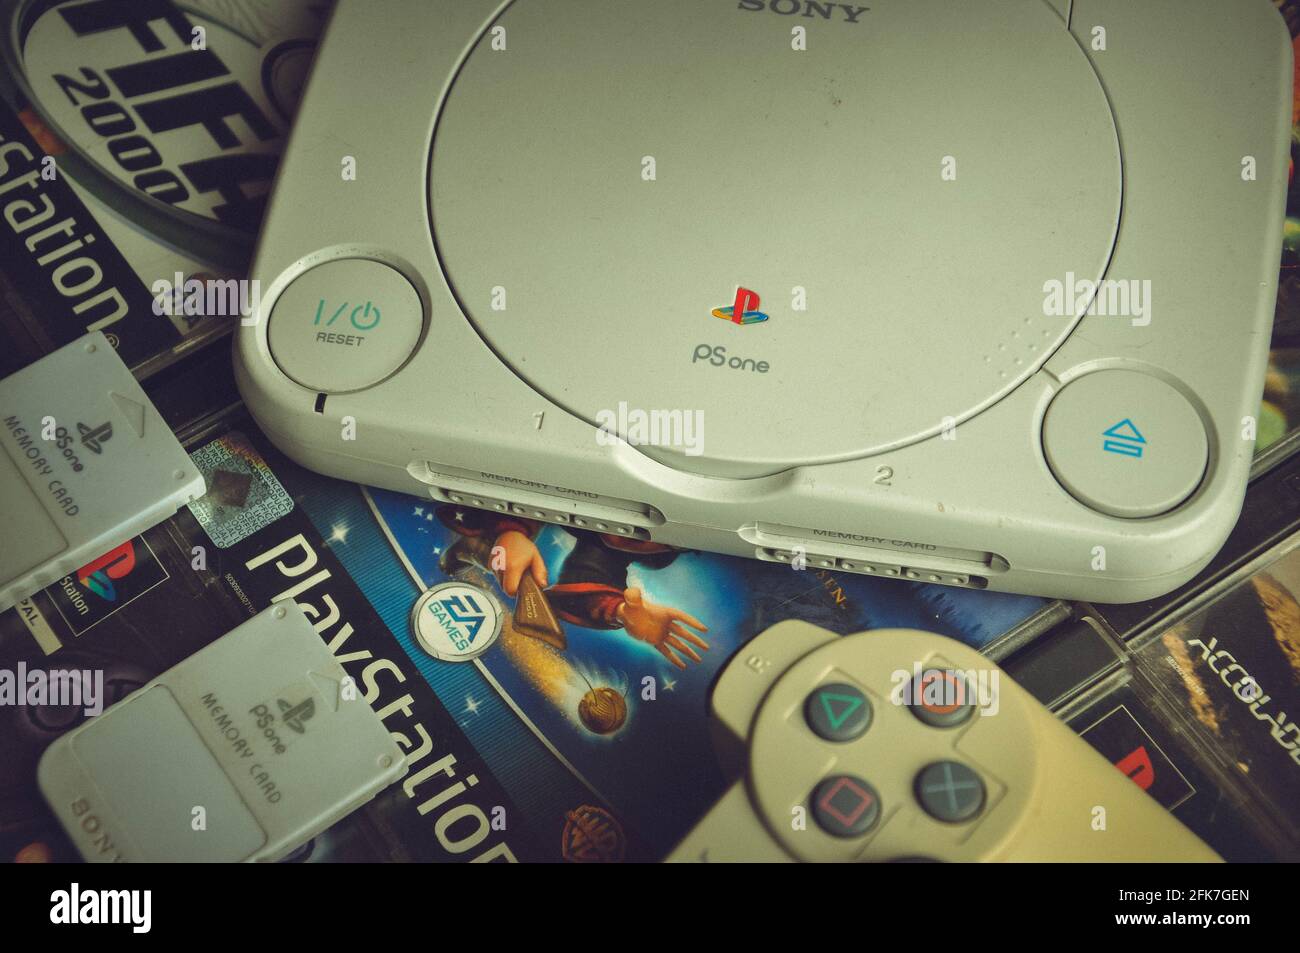 sales plan taxi Minimize Sony Playstation One Slim with memory cards and games in background Stock  Photo - Alamy